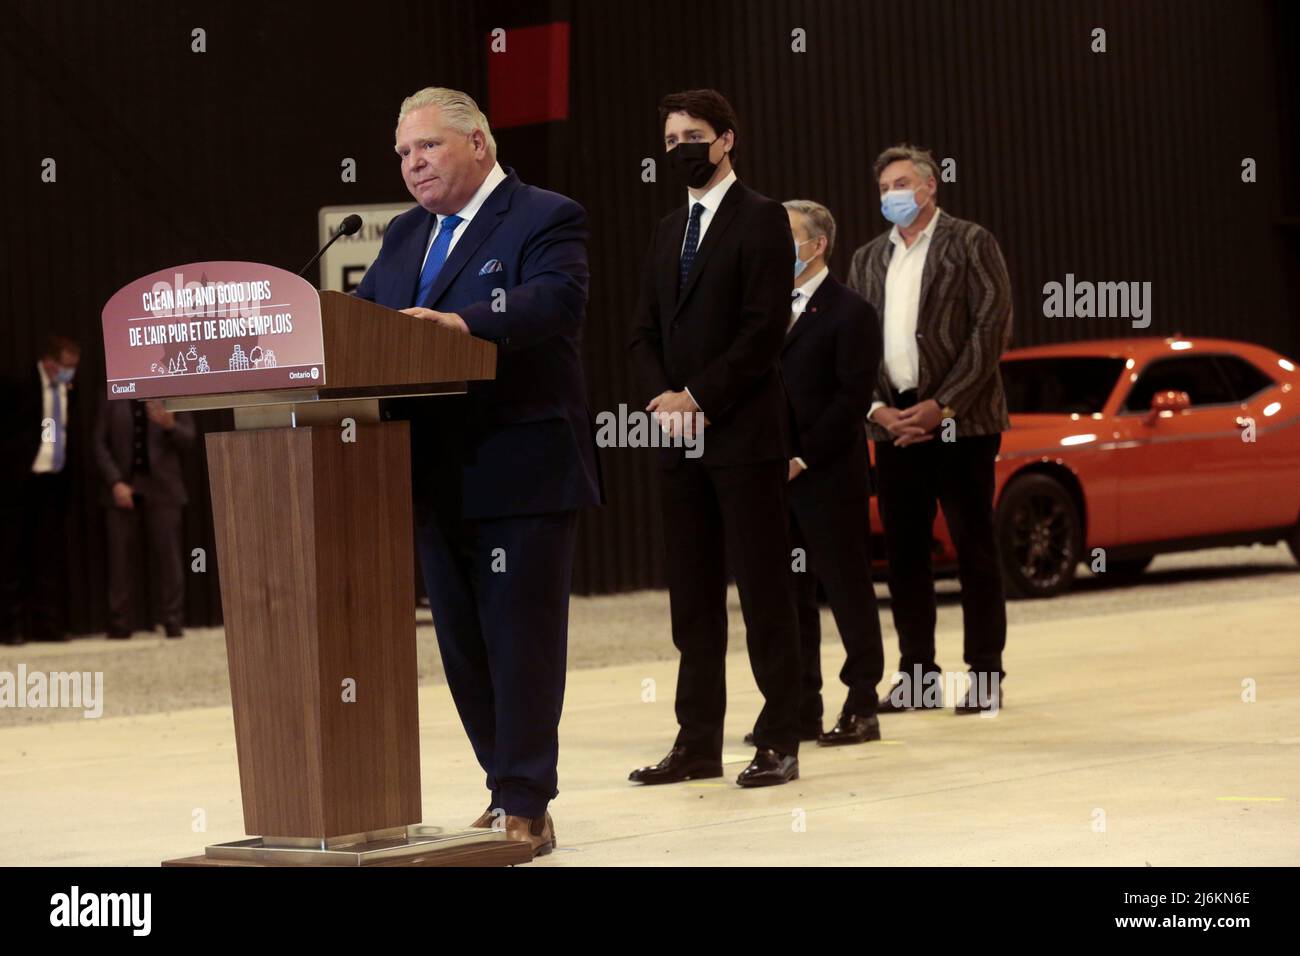 Ontario's Premier Doug Ford and Canada's Prime Minister Justin Trudeau answer questions from the media at the Stellantis Research and Development Centre in Windsor, Ontario, Canada May 2, 2022.  REUTERS/Rebecca Cook Stock Photo